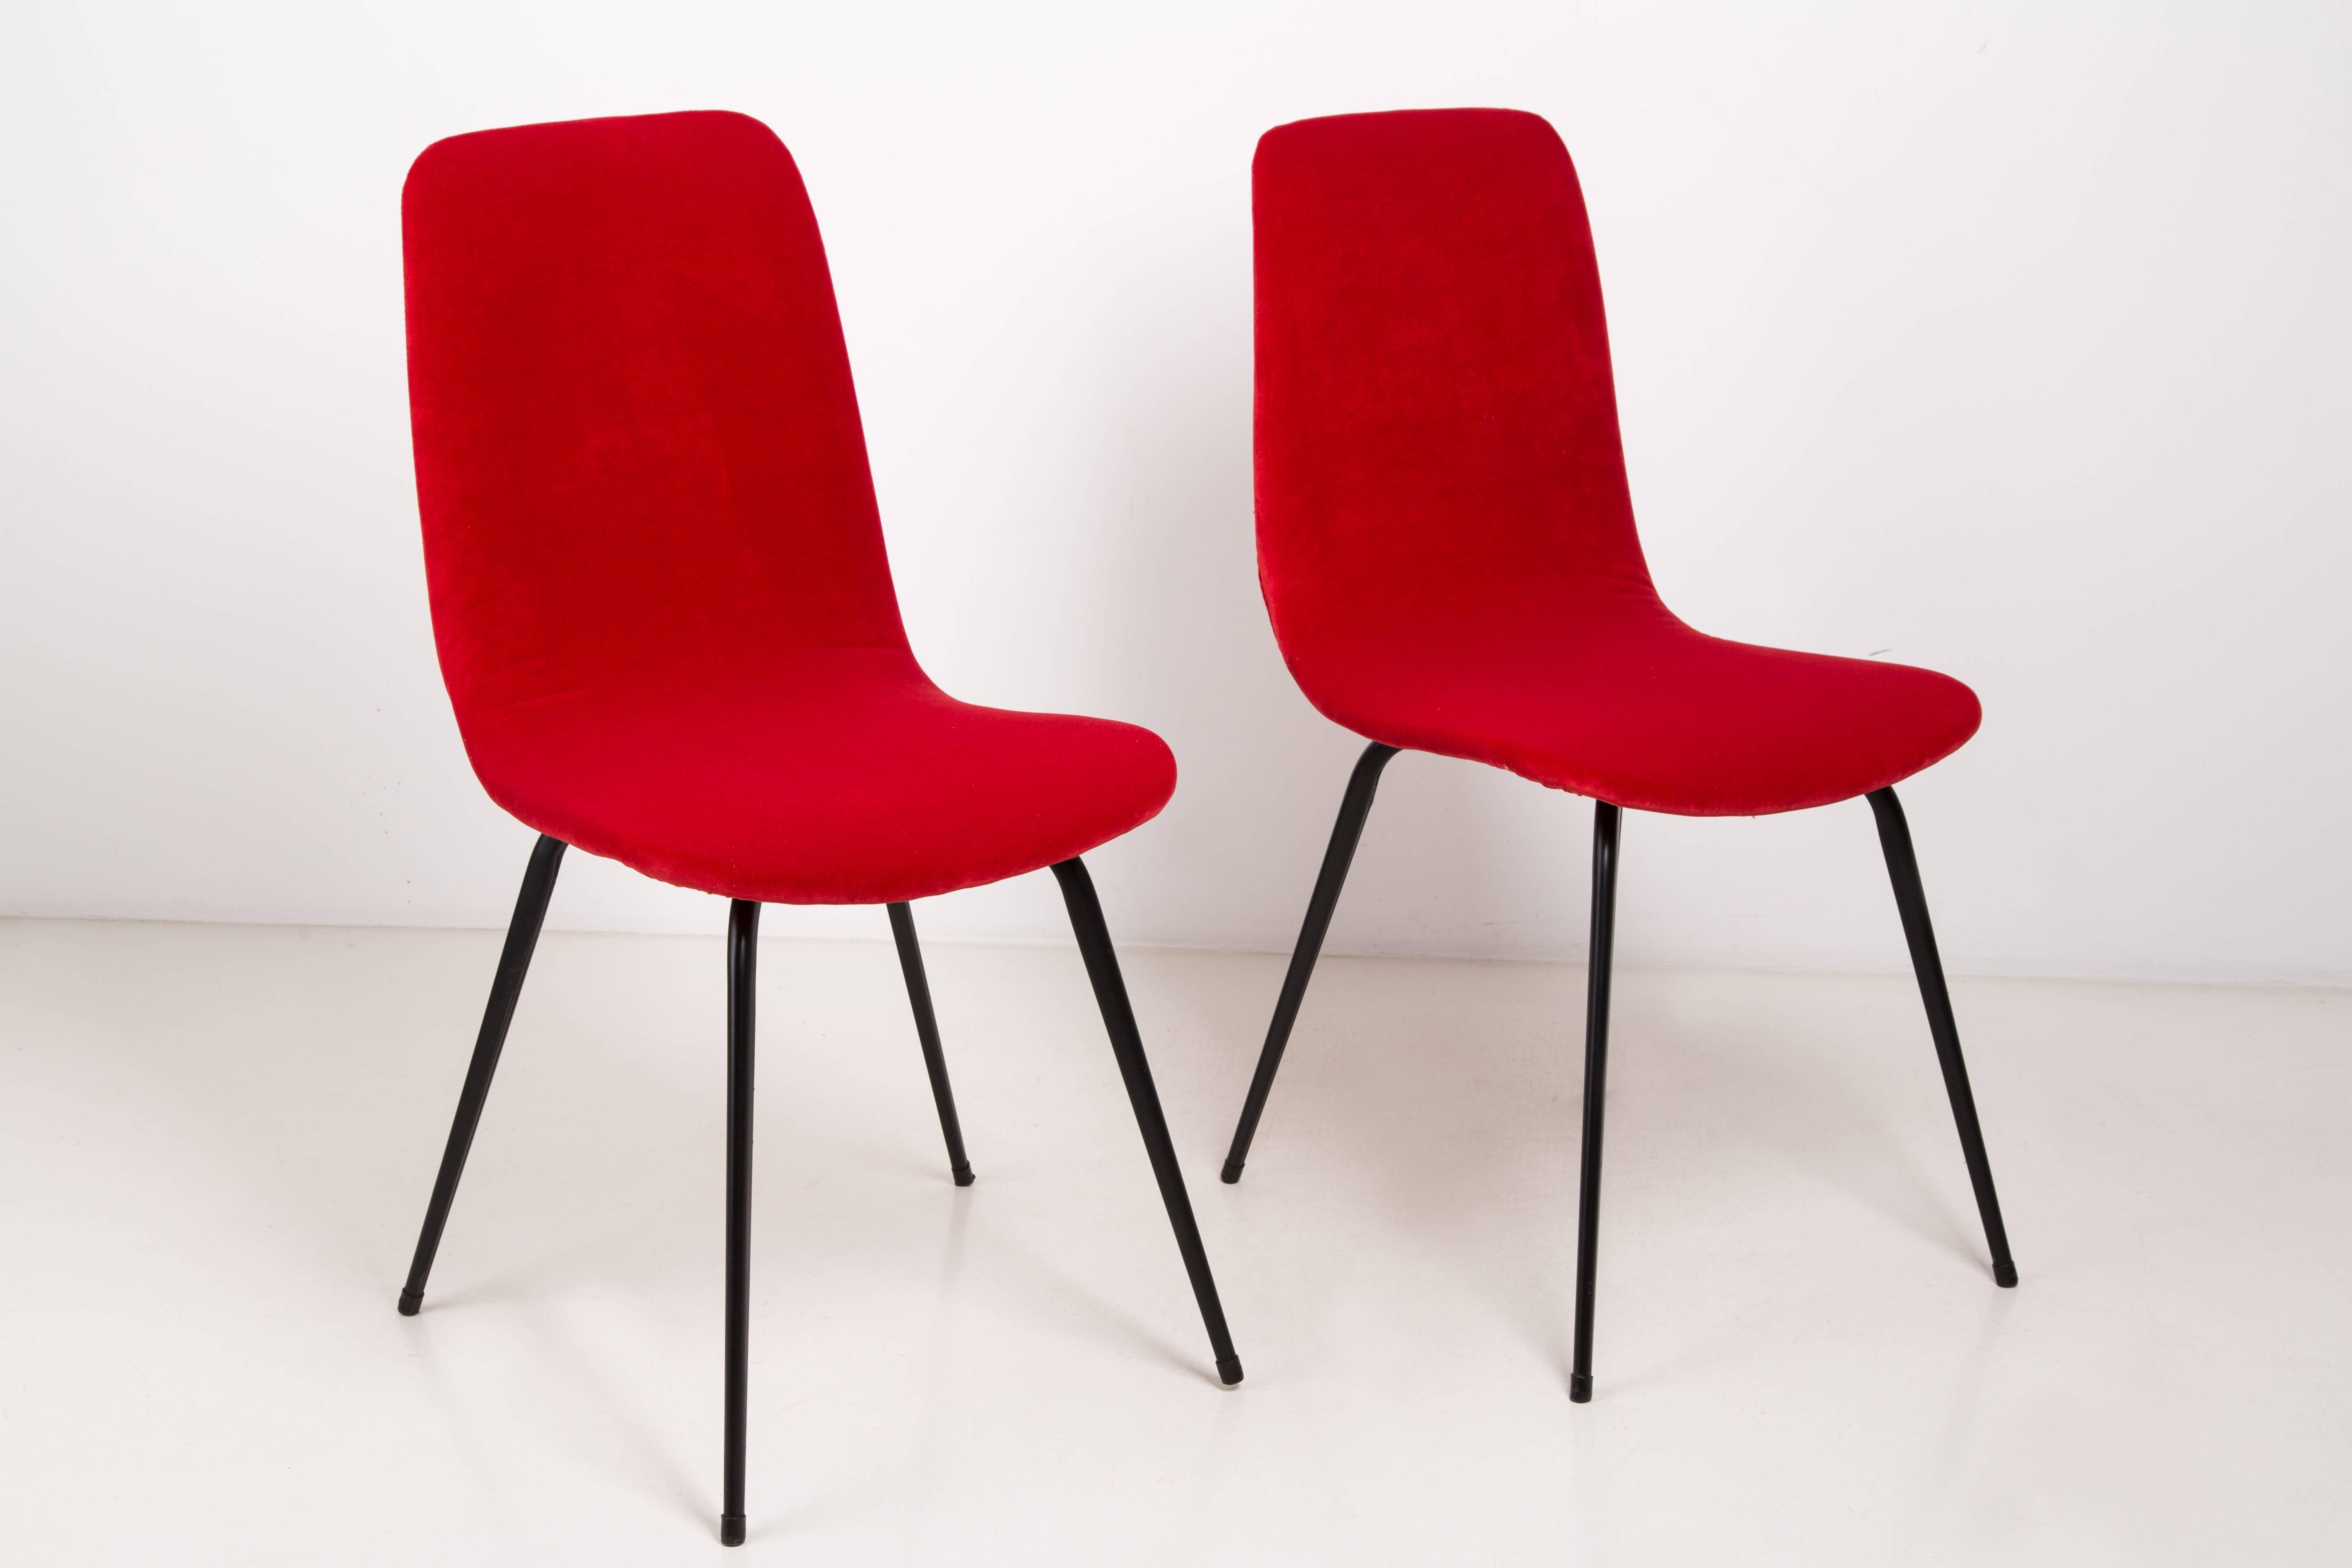 Mid-Century Modern Set of Two Mid Century Red Velvet Chairs, Fameg, A-6150 type, Europe, 1960s.  For Sale